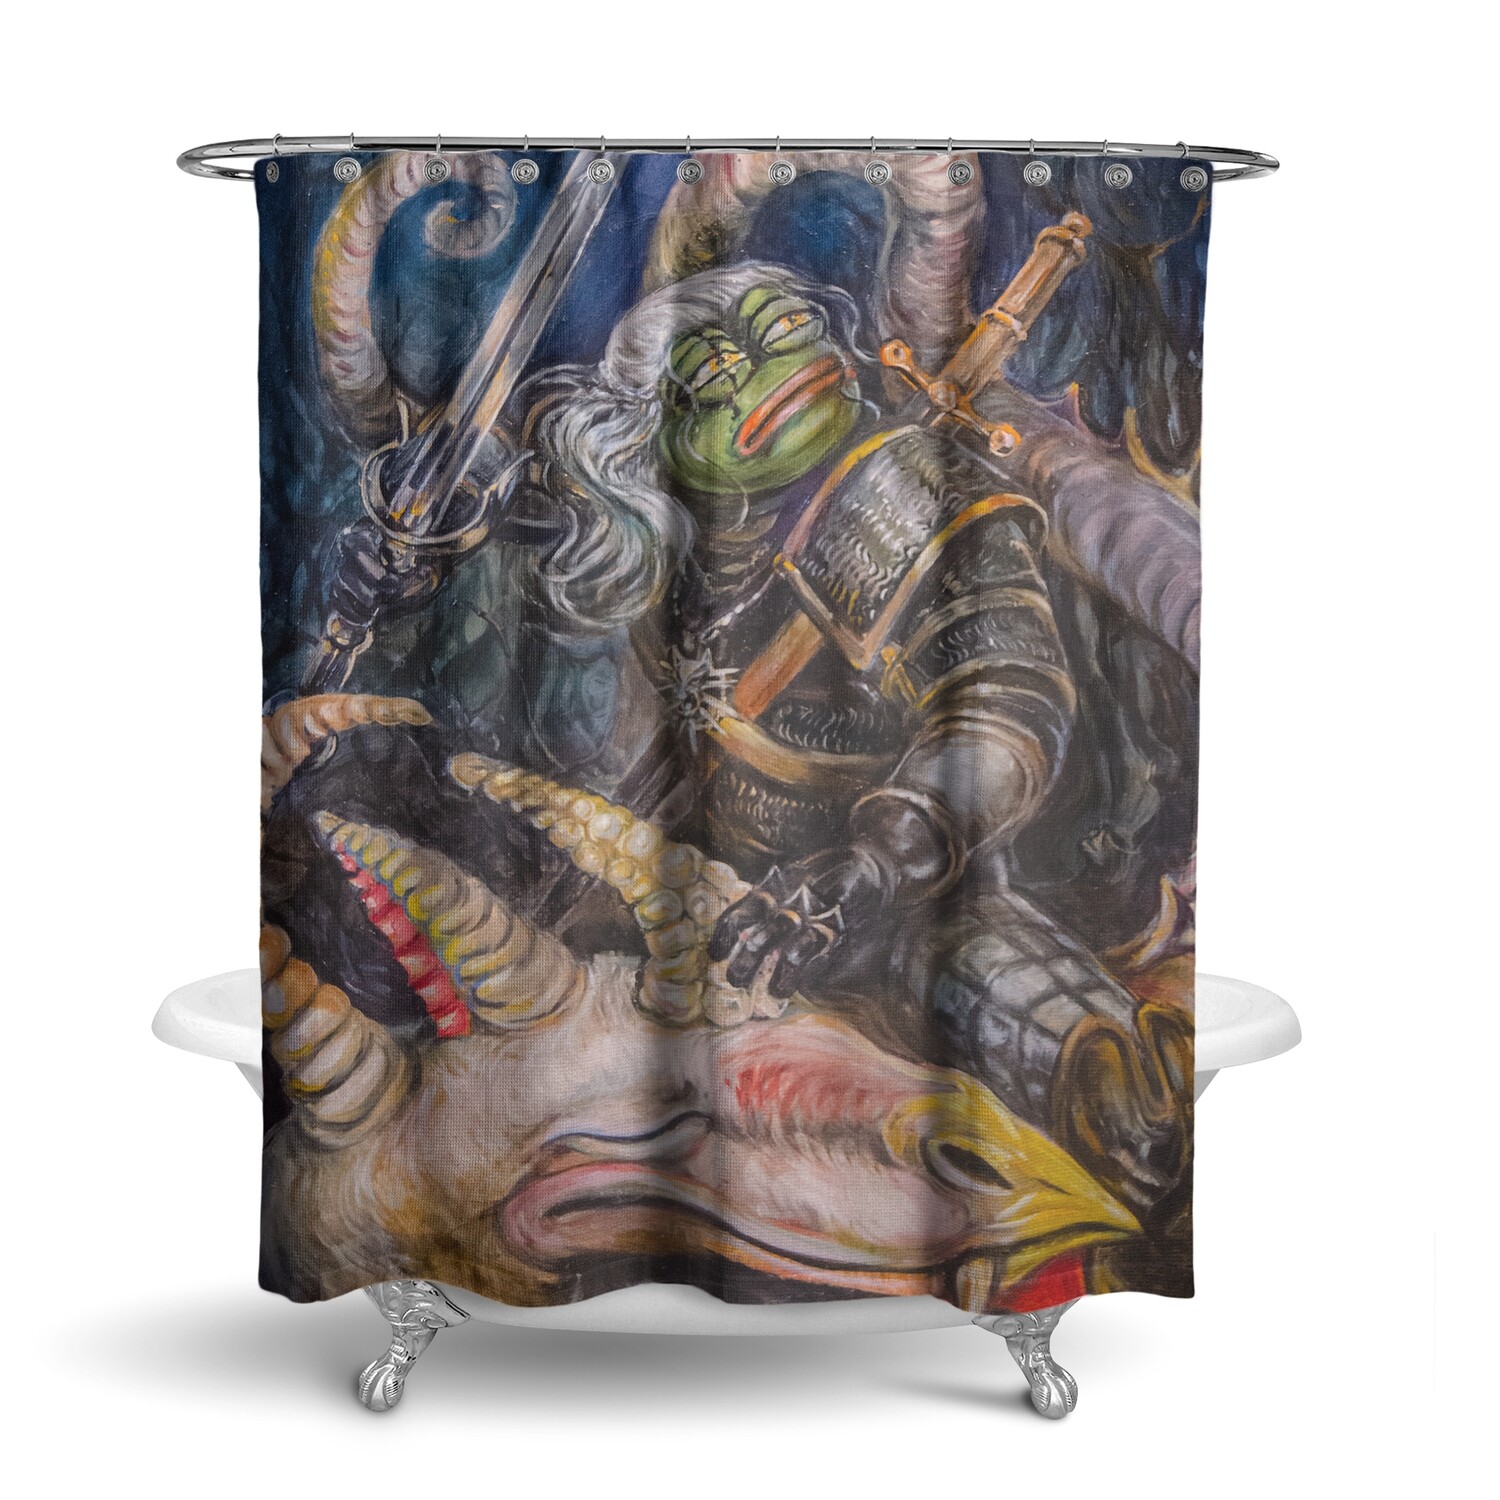 Pepe The Witcher (shower curtain)